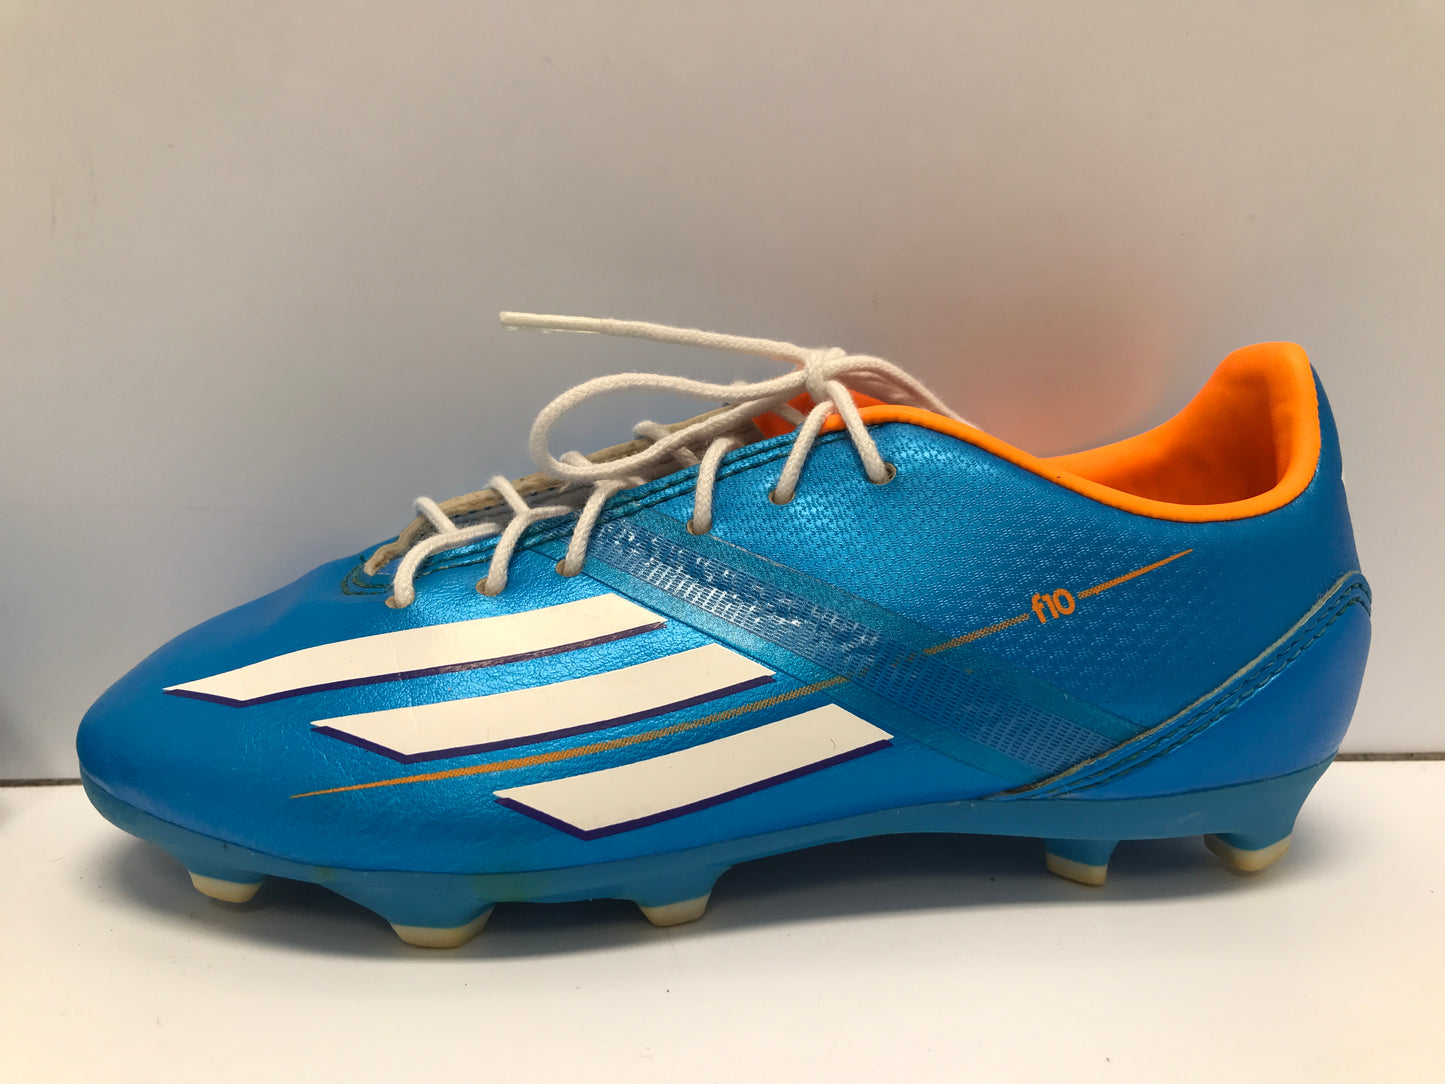 Soccer Shoes Cleats Child Size 12 Adidas Blue Tangerine Excellent